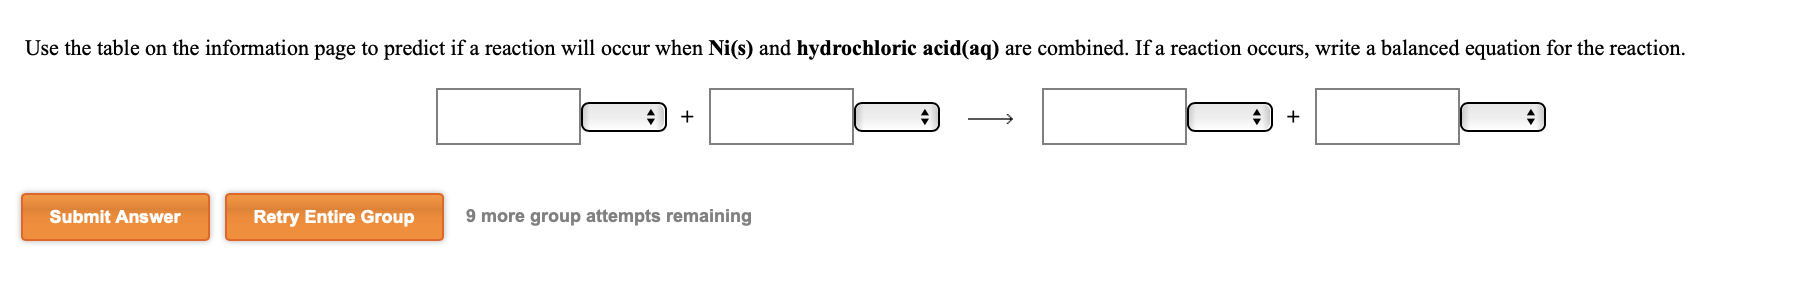 Use the table on the information page to predict if a reaction will occur when Ni(s) and hydrochloric acid(aq) are combined. If a reaction occurs, write a balanced equation for the reaction.
Submit Answer
Retry Entire Group
9 more group attempts remaining
